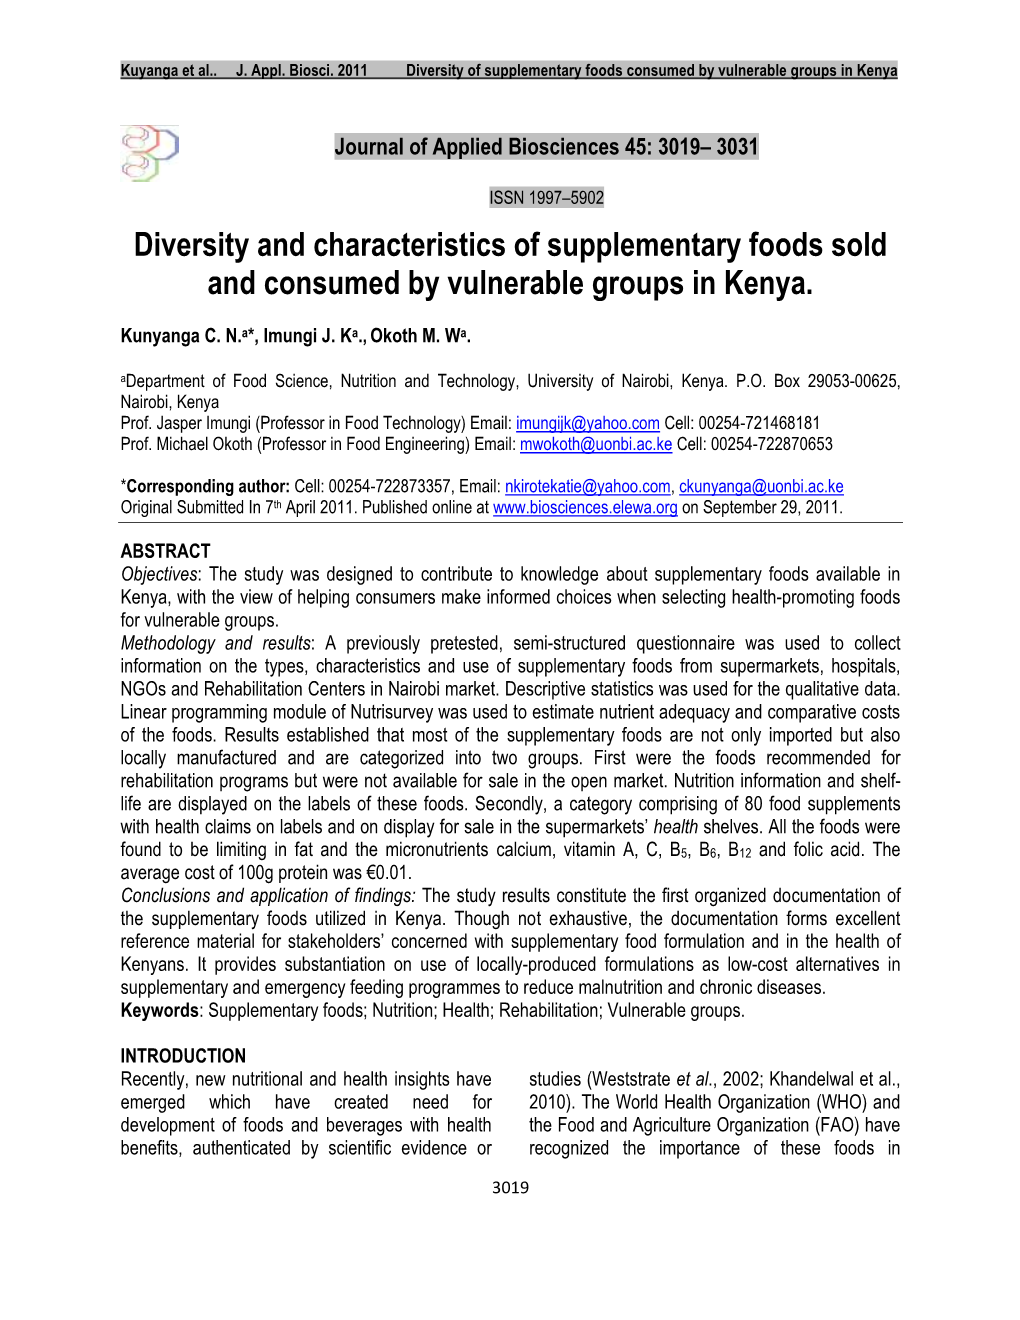 Diversity and Characteristics of Supplementary Foods Sold and Consumed by Vulnerable Groups in Kenya